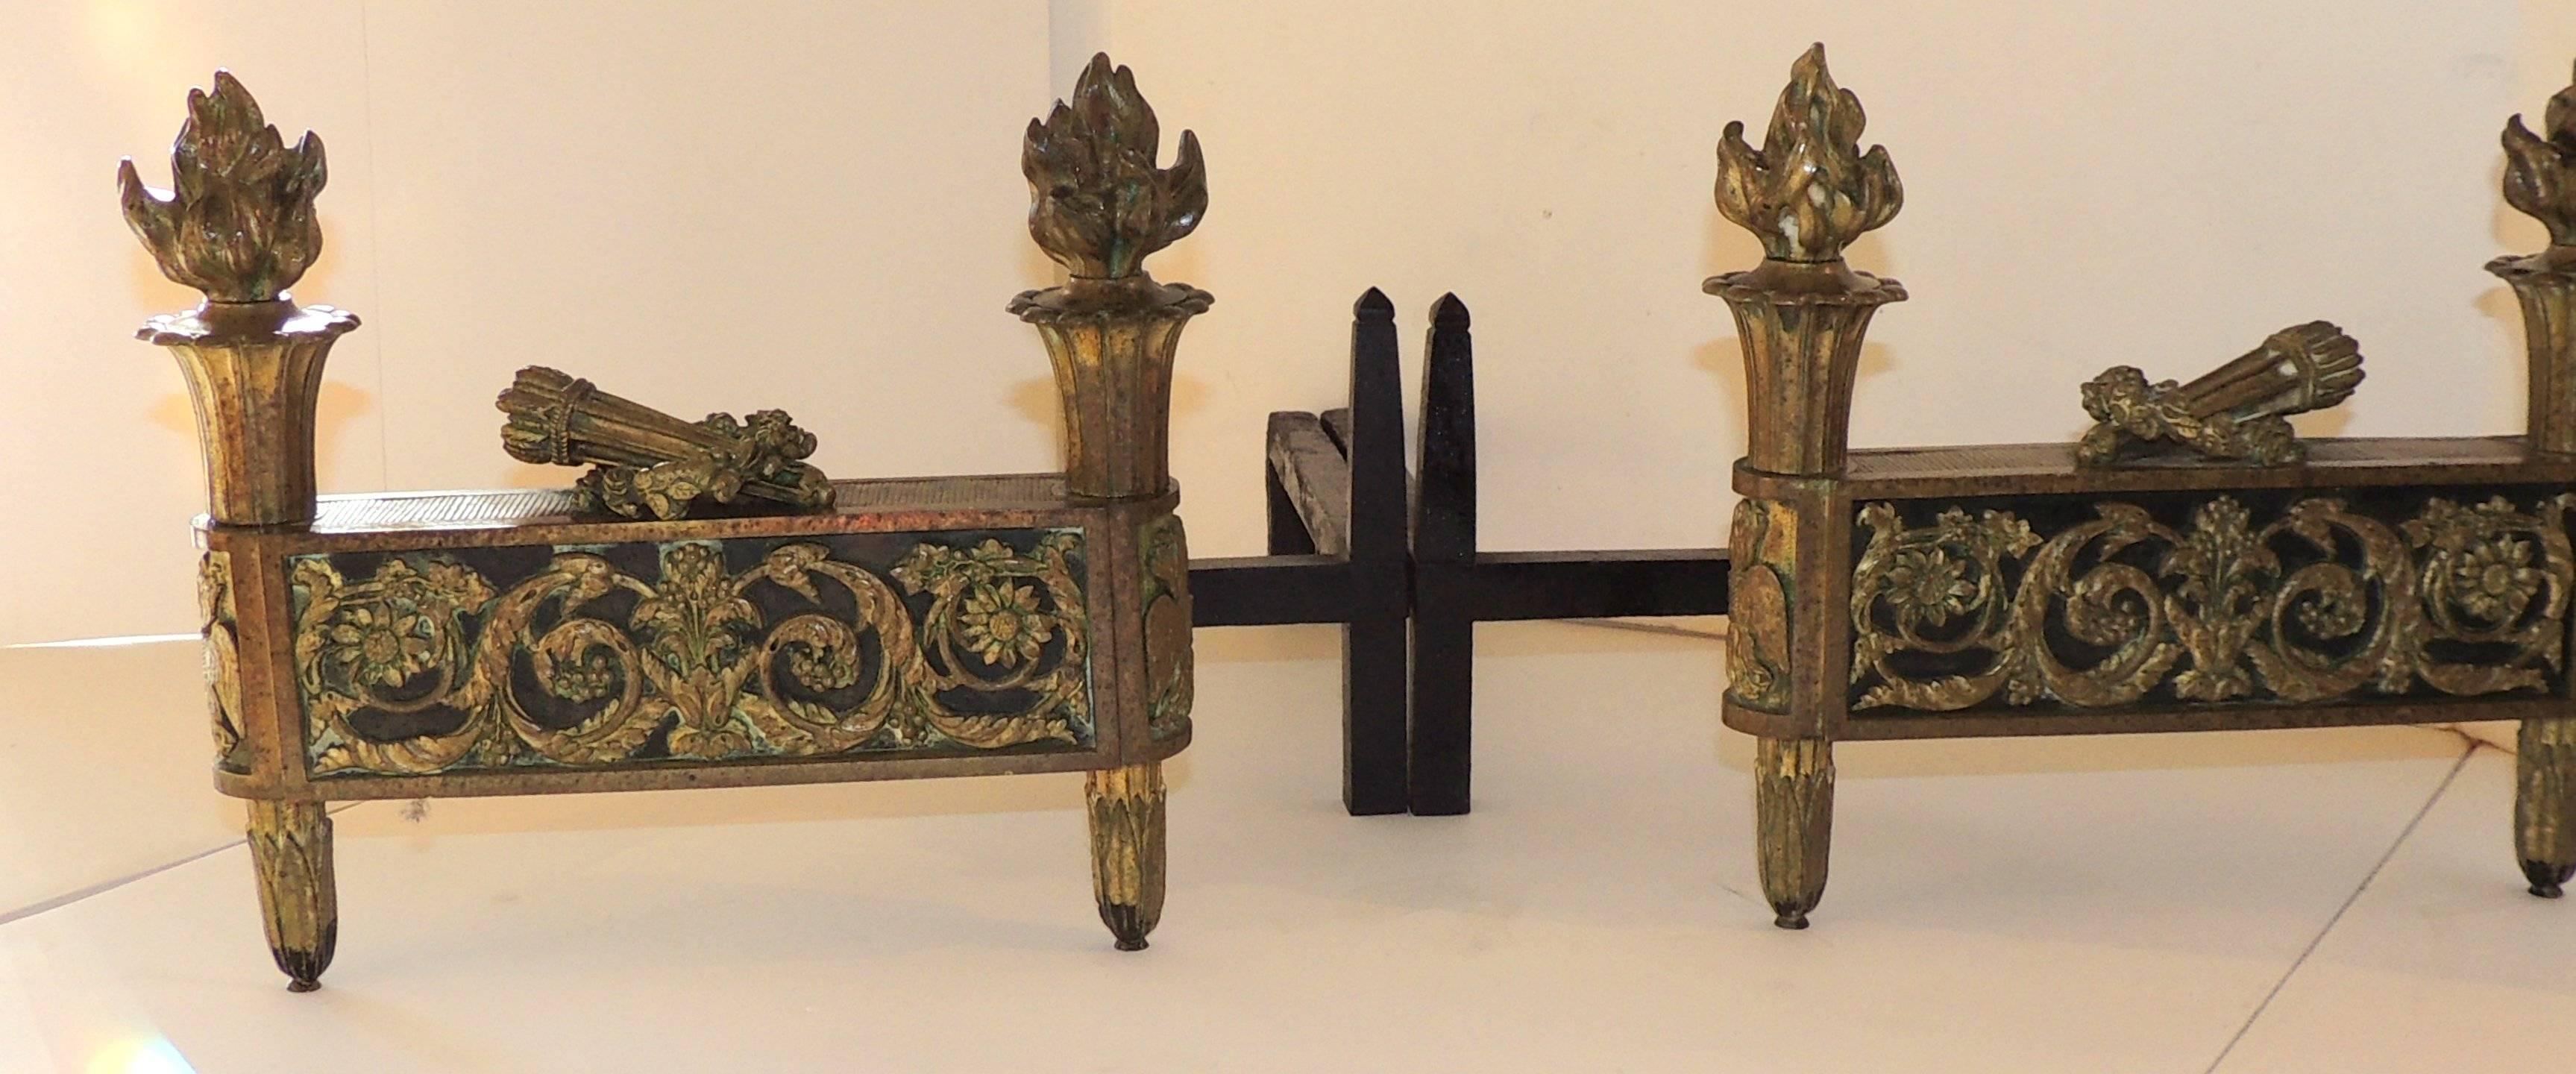 
Wonderful French Neoclassical Gilt Dore Bronze with Black Marble Insert Chenets.

Measures: 12.5" W x 11" H x 19" D.